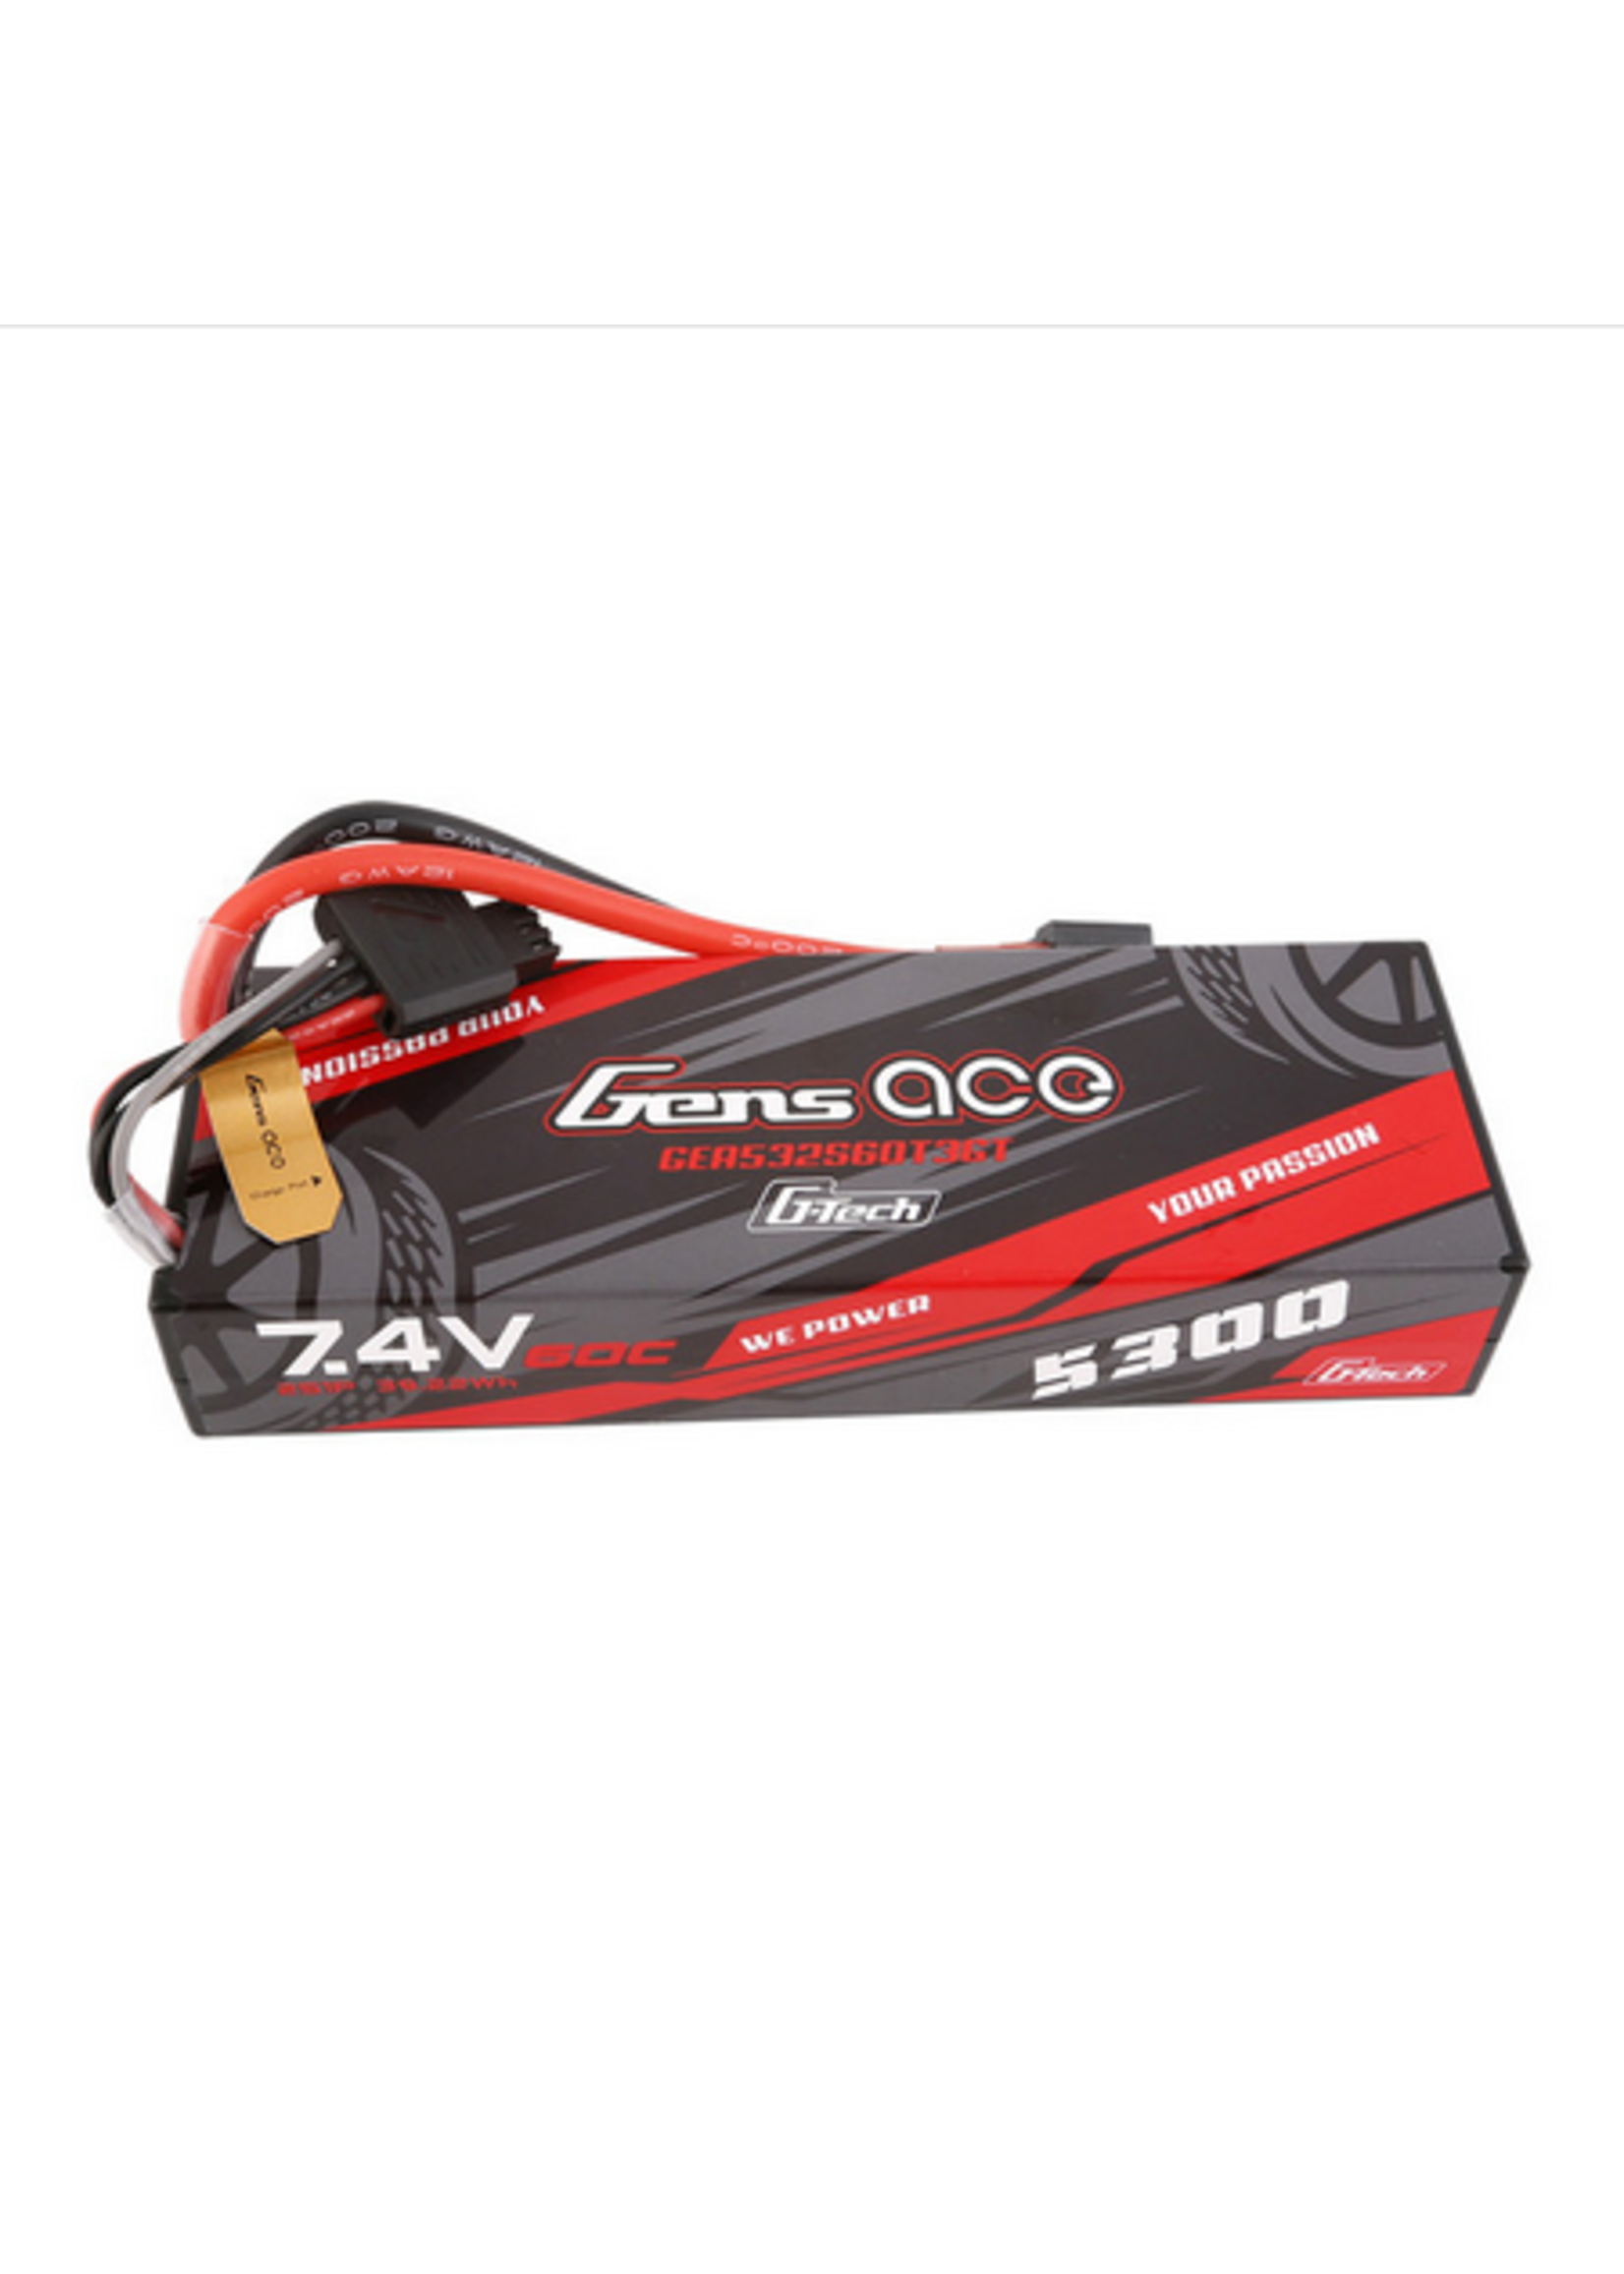 Gens Ace GEA532S60T3GT Gens Ace  G-tech 5300mAh 7.4V 60C 2S1P HardCase Lipo Battery Pack 24# with EC3 and Deans adapter for RC Car